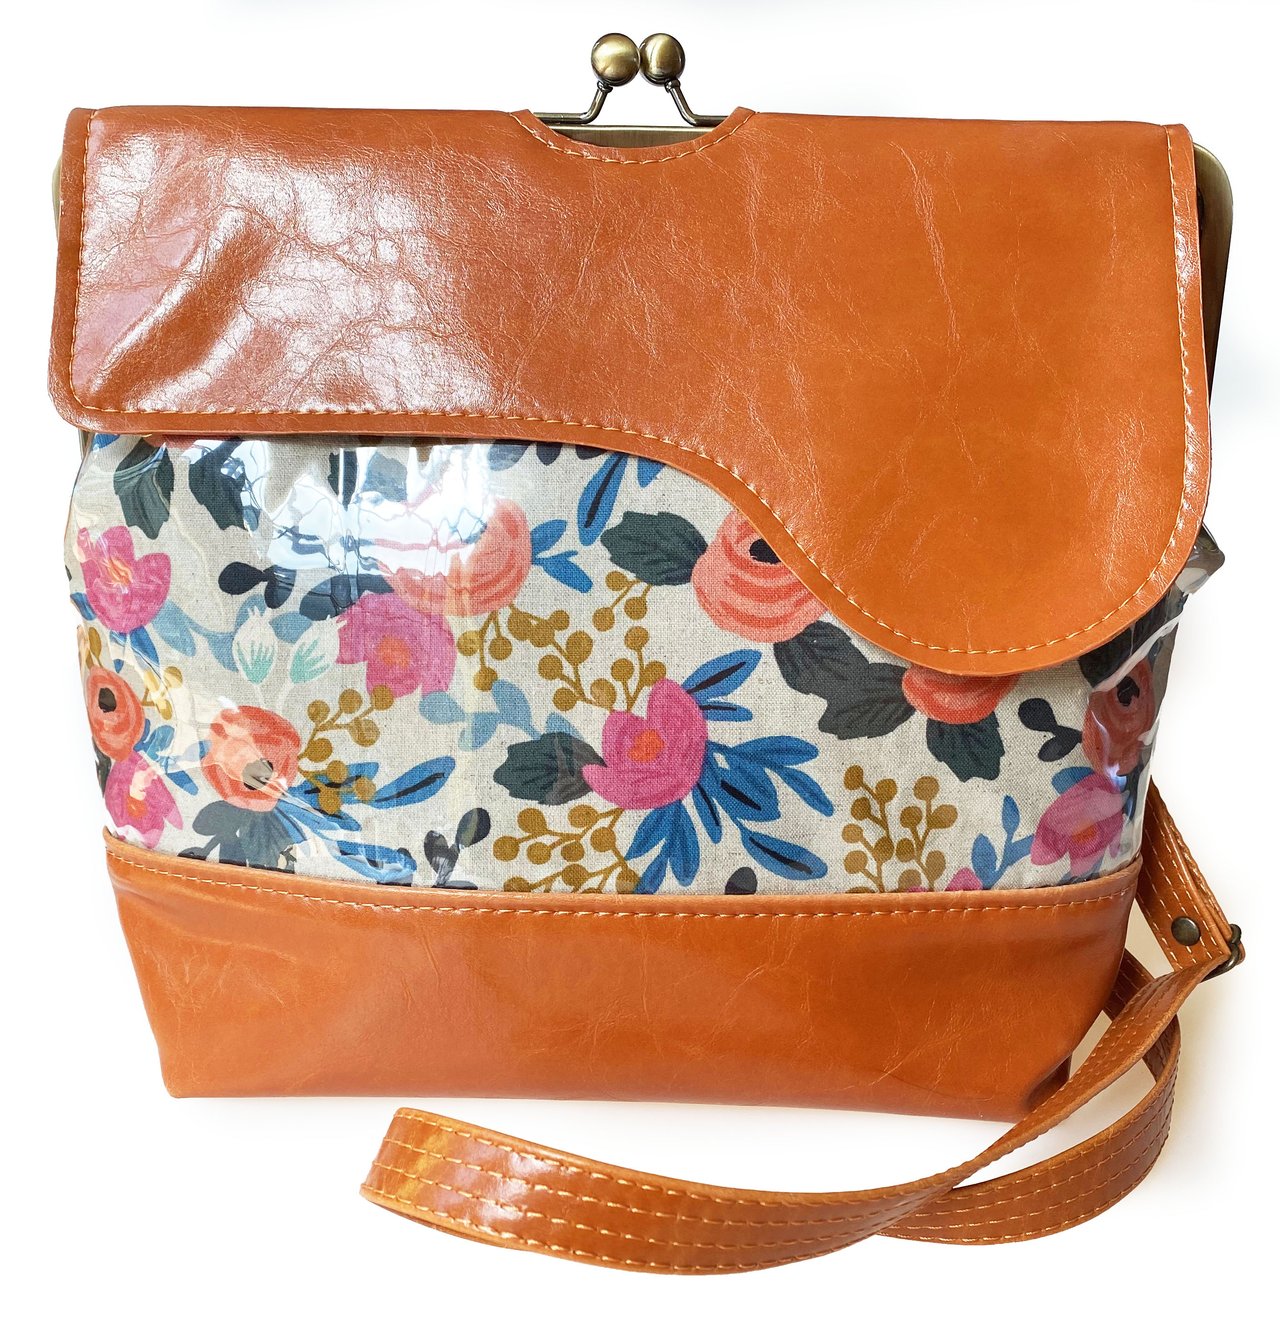 Vegan Leather Handbags, Purses, Totes & Wallets. Made in the USA – John Met Betty